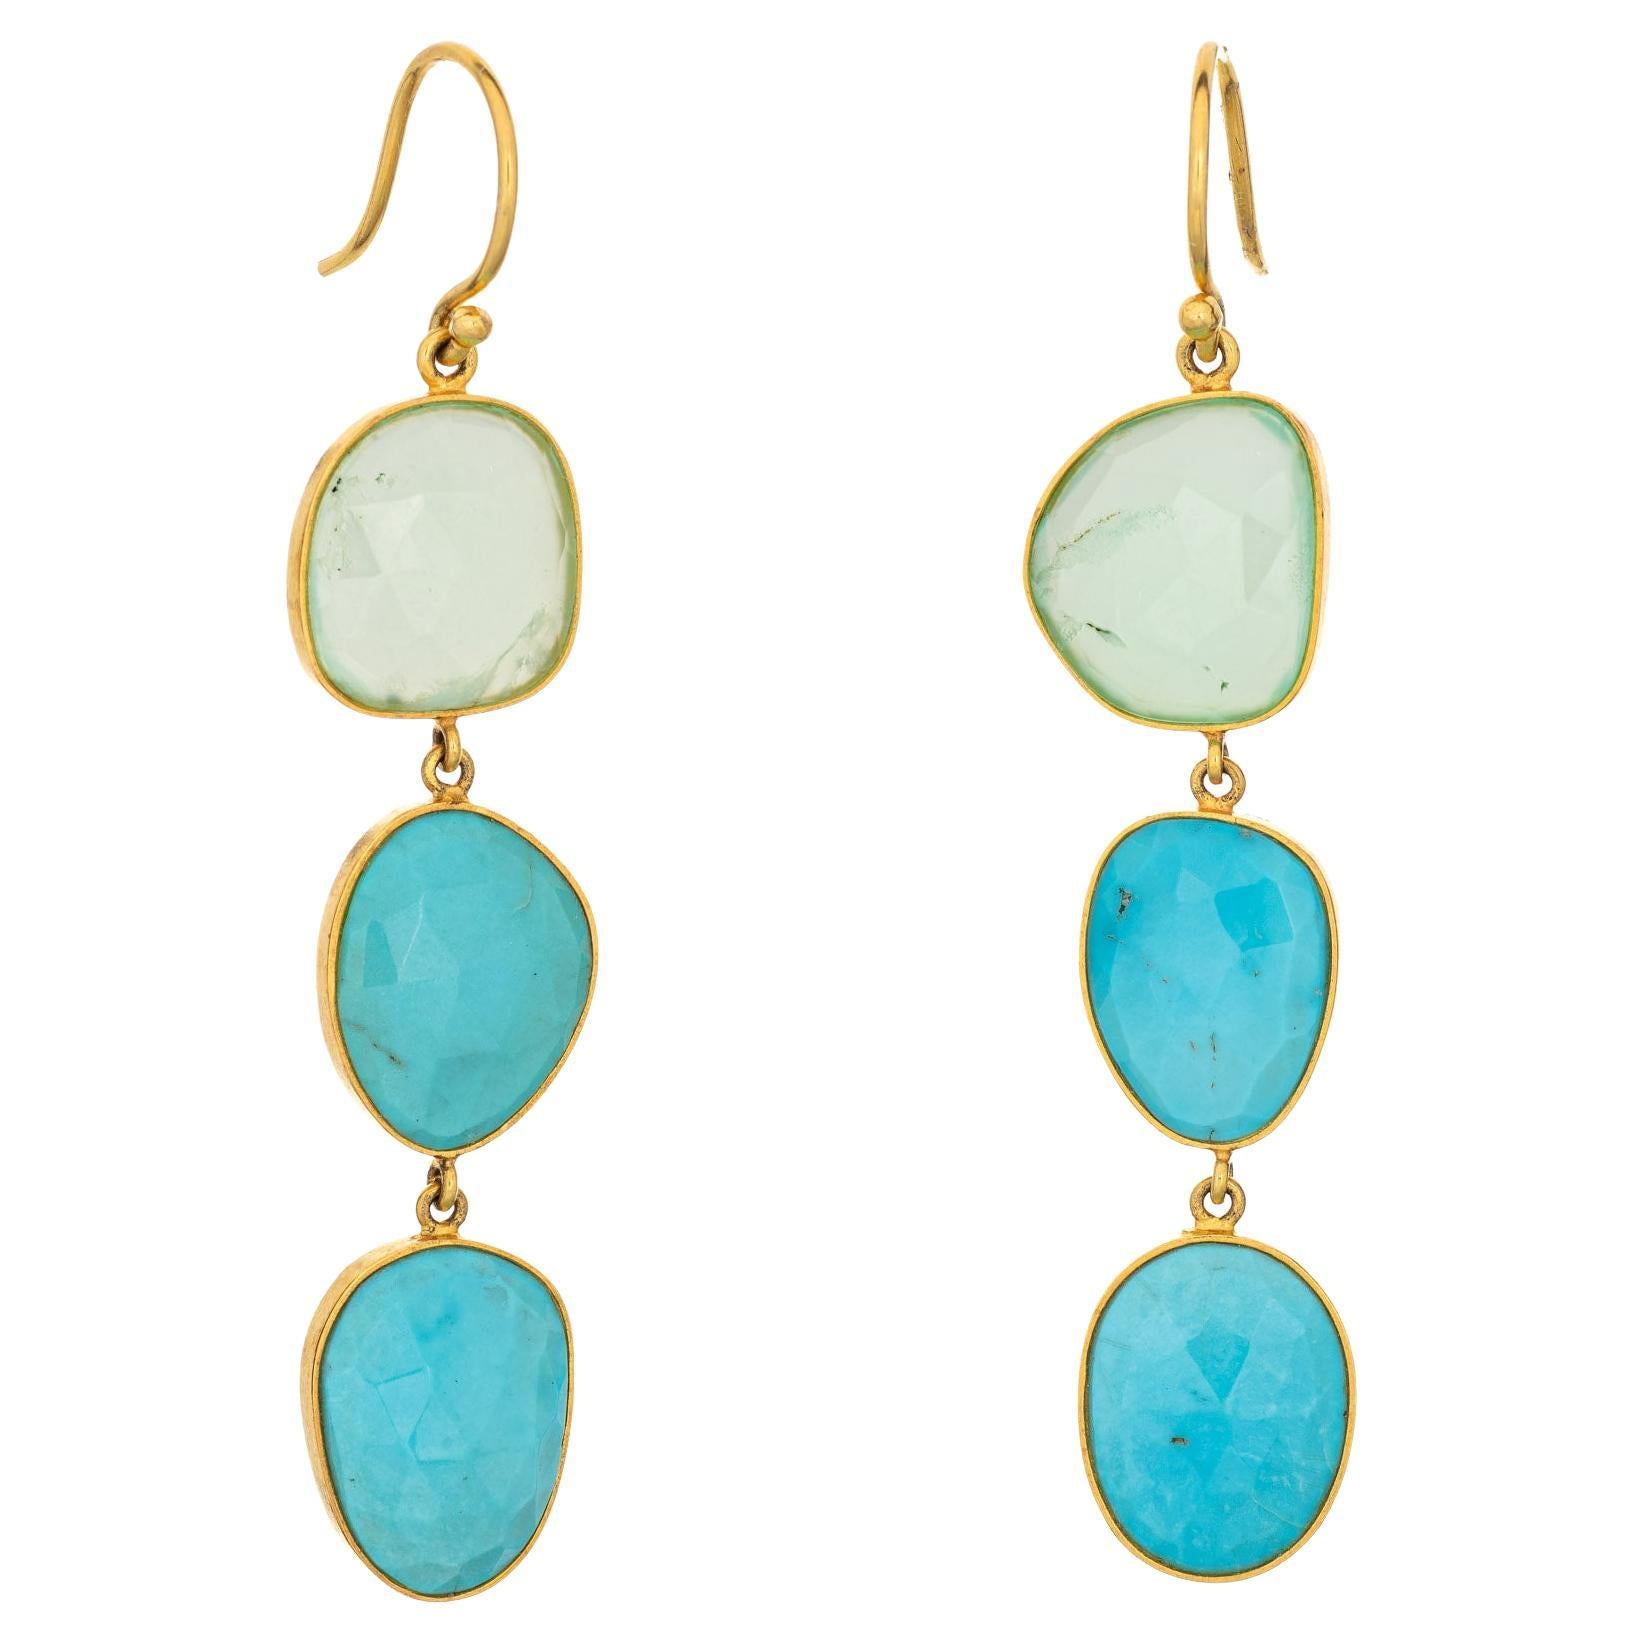 Turquoise Green Chalcedony Earrings Estate 14k Yellow Gold 2.25" Drops Jewelry